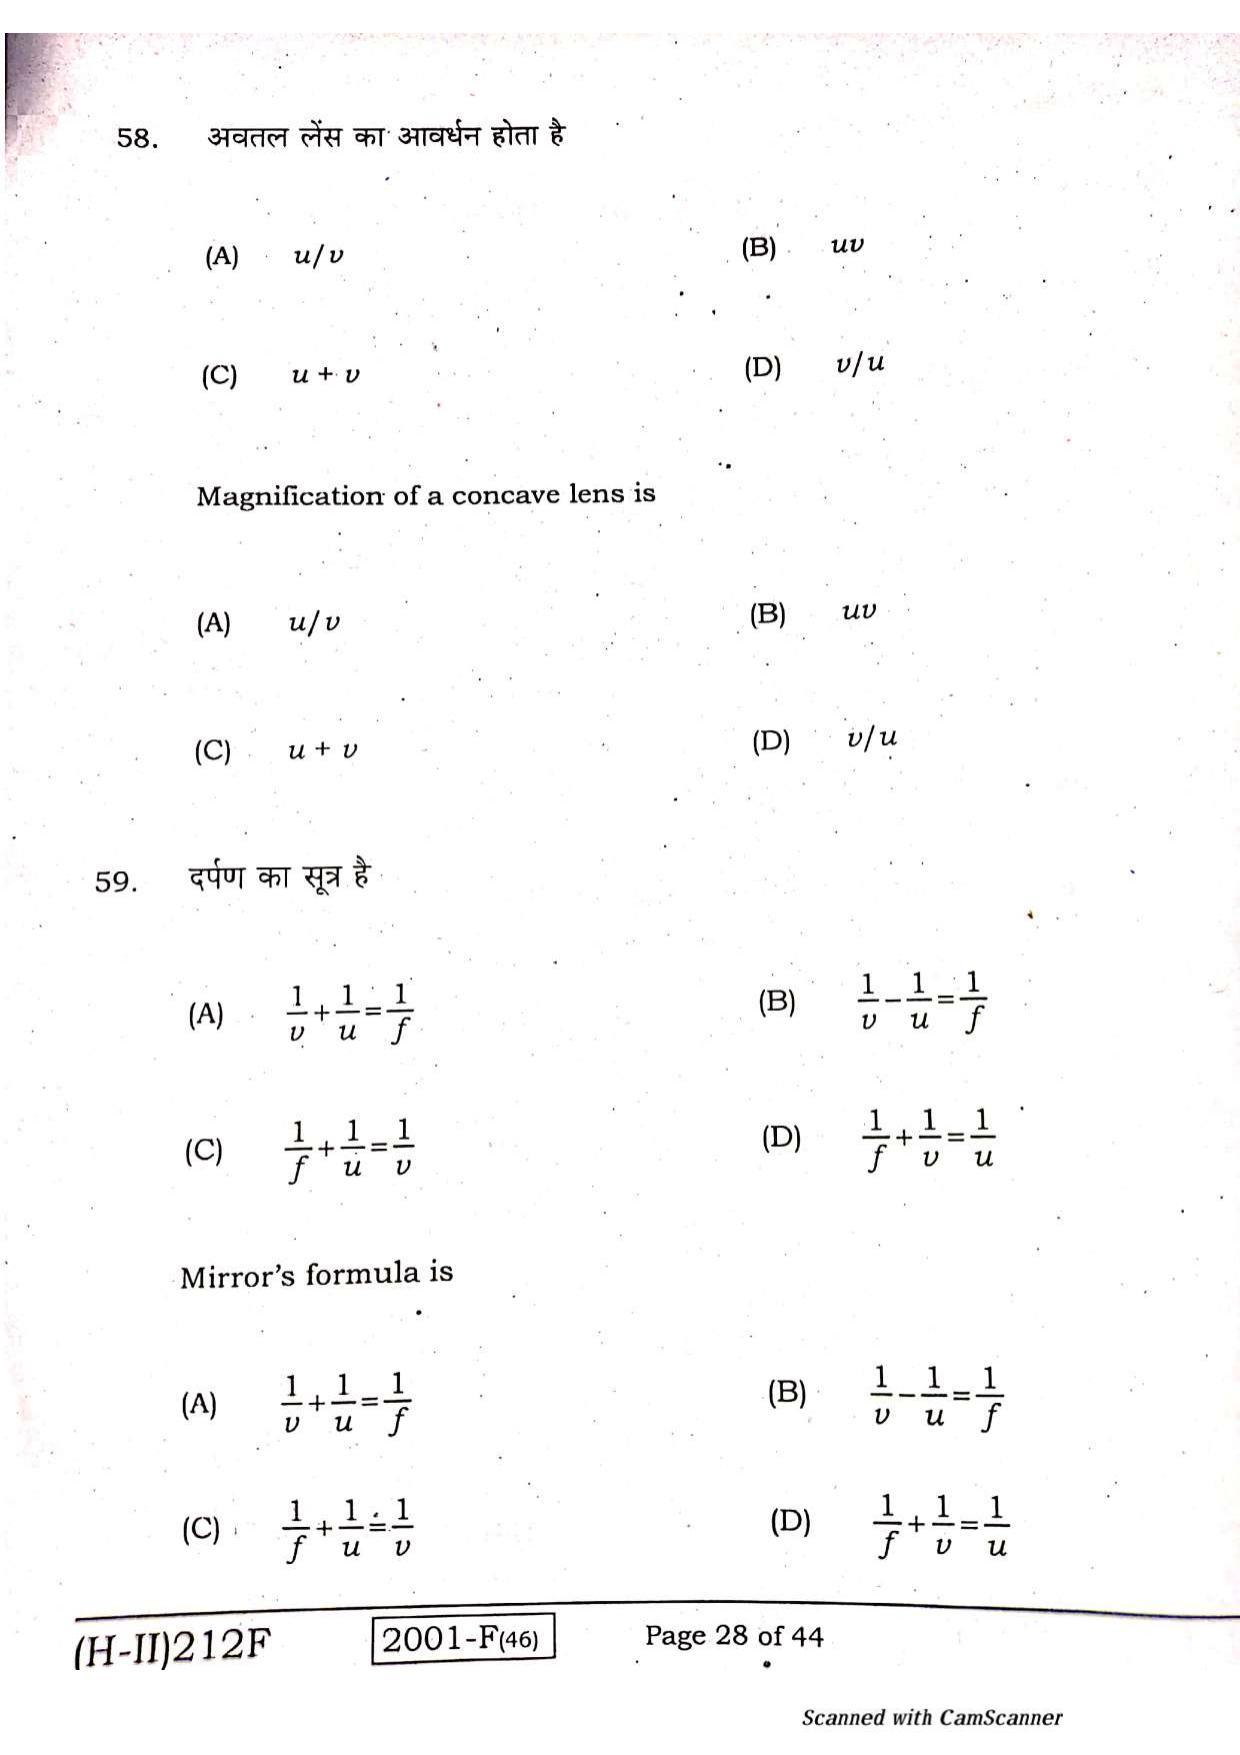 Bihar Board Class 10 Science 2021 (2nd Sitting) Question Paper - Page 26